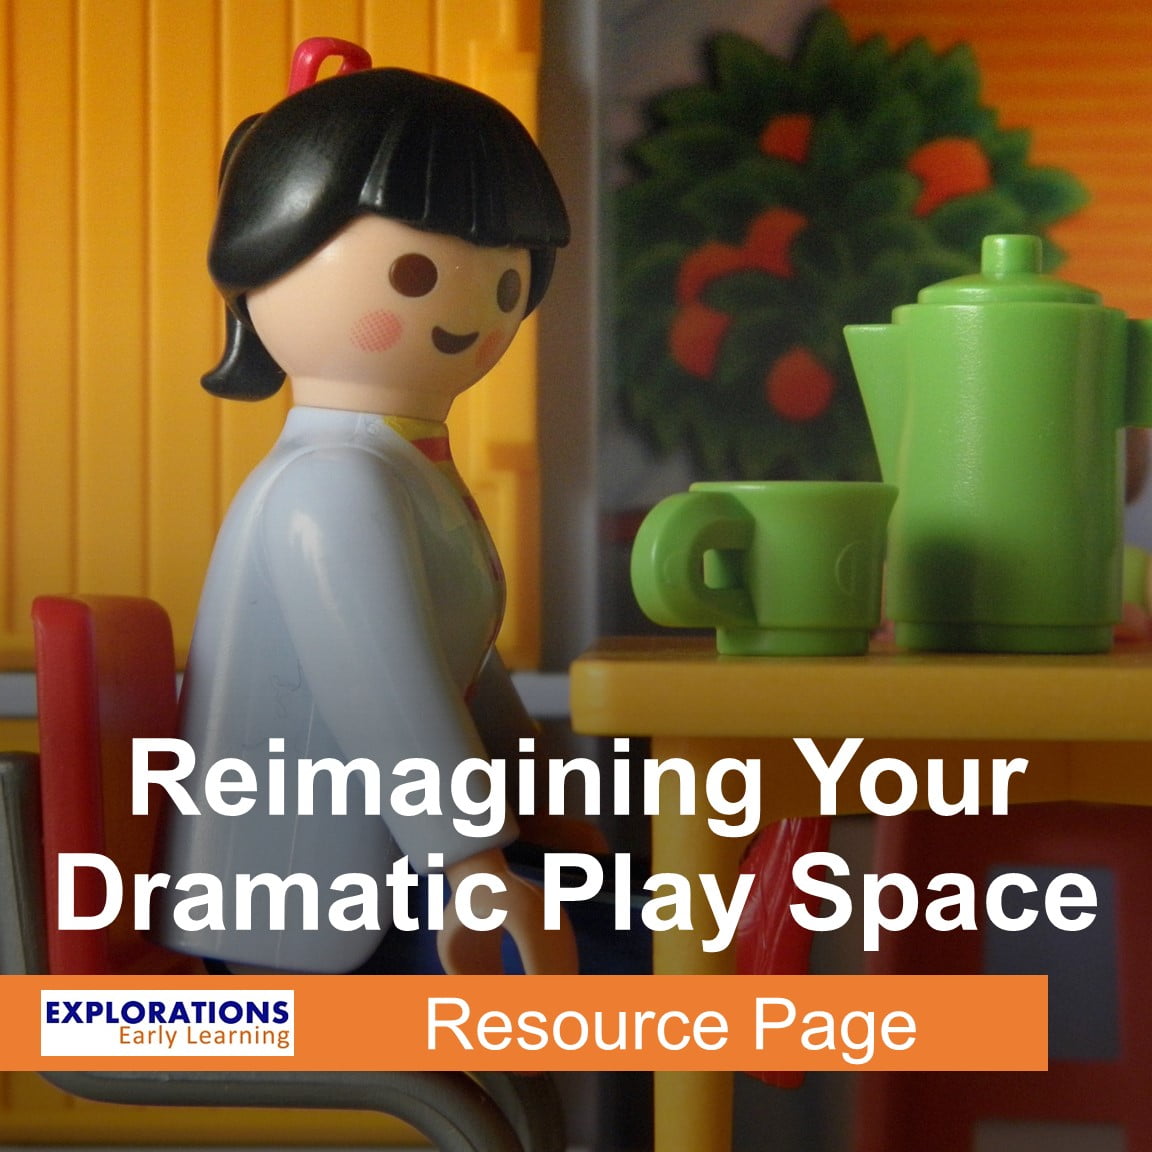 Reimagining Your Dramatic Play Space